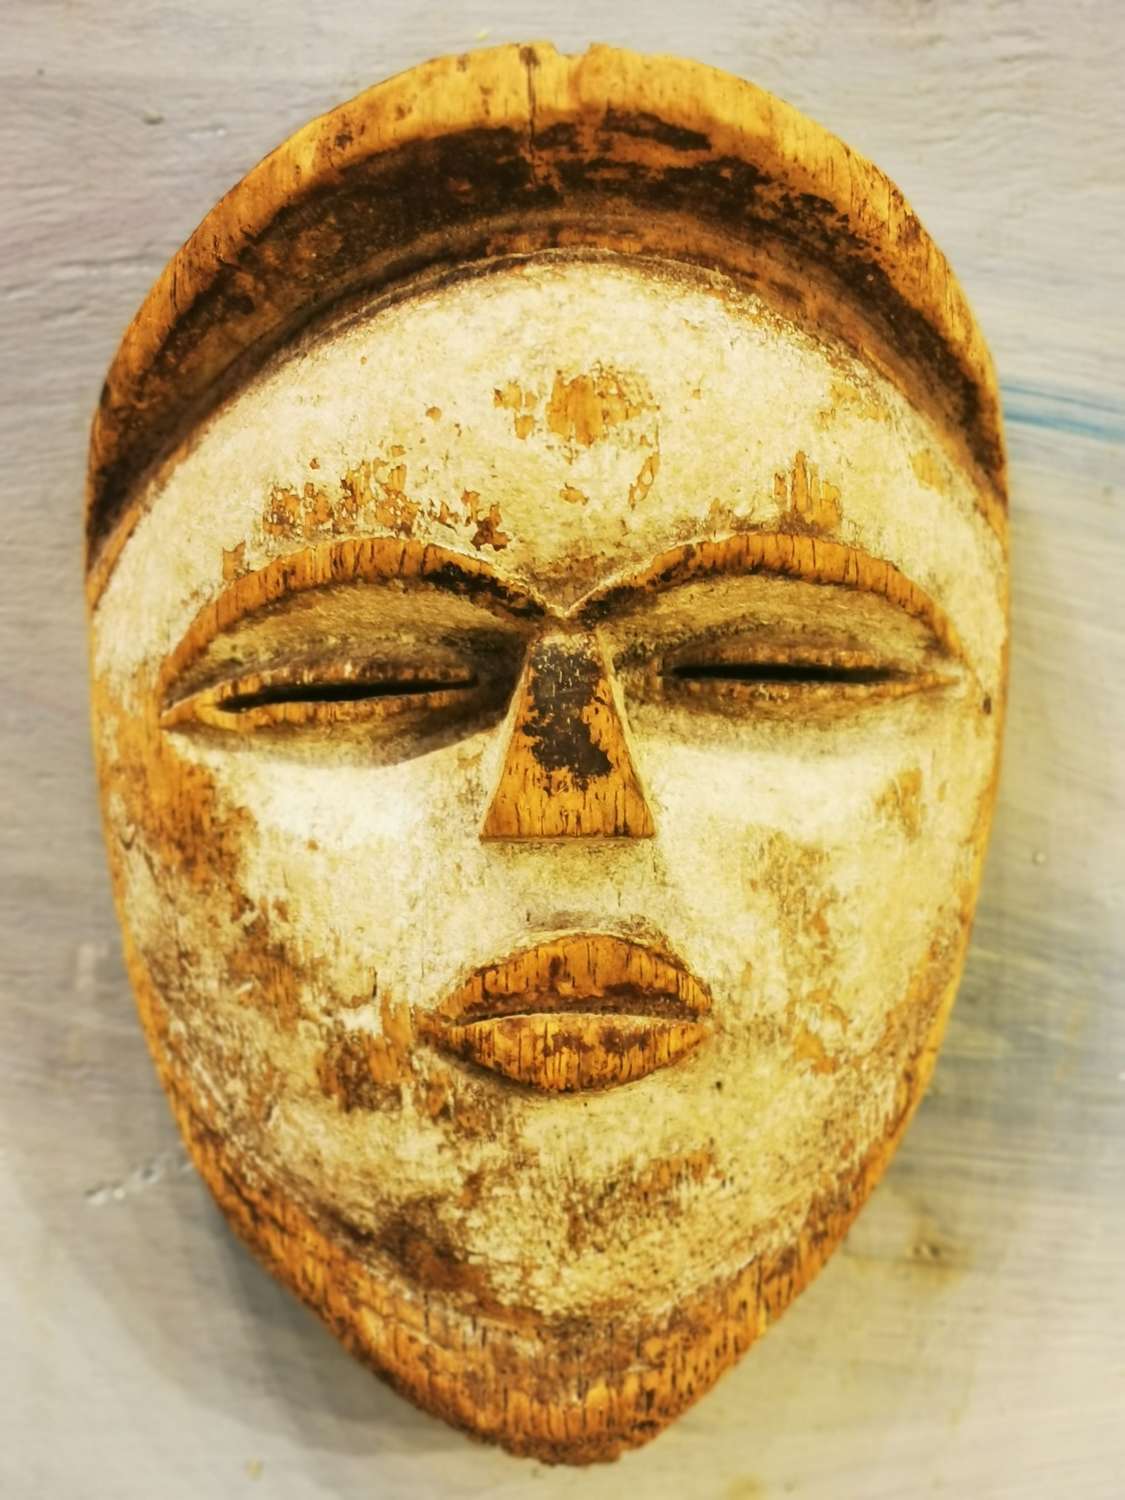 Another carved wood mask